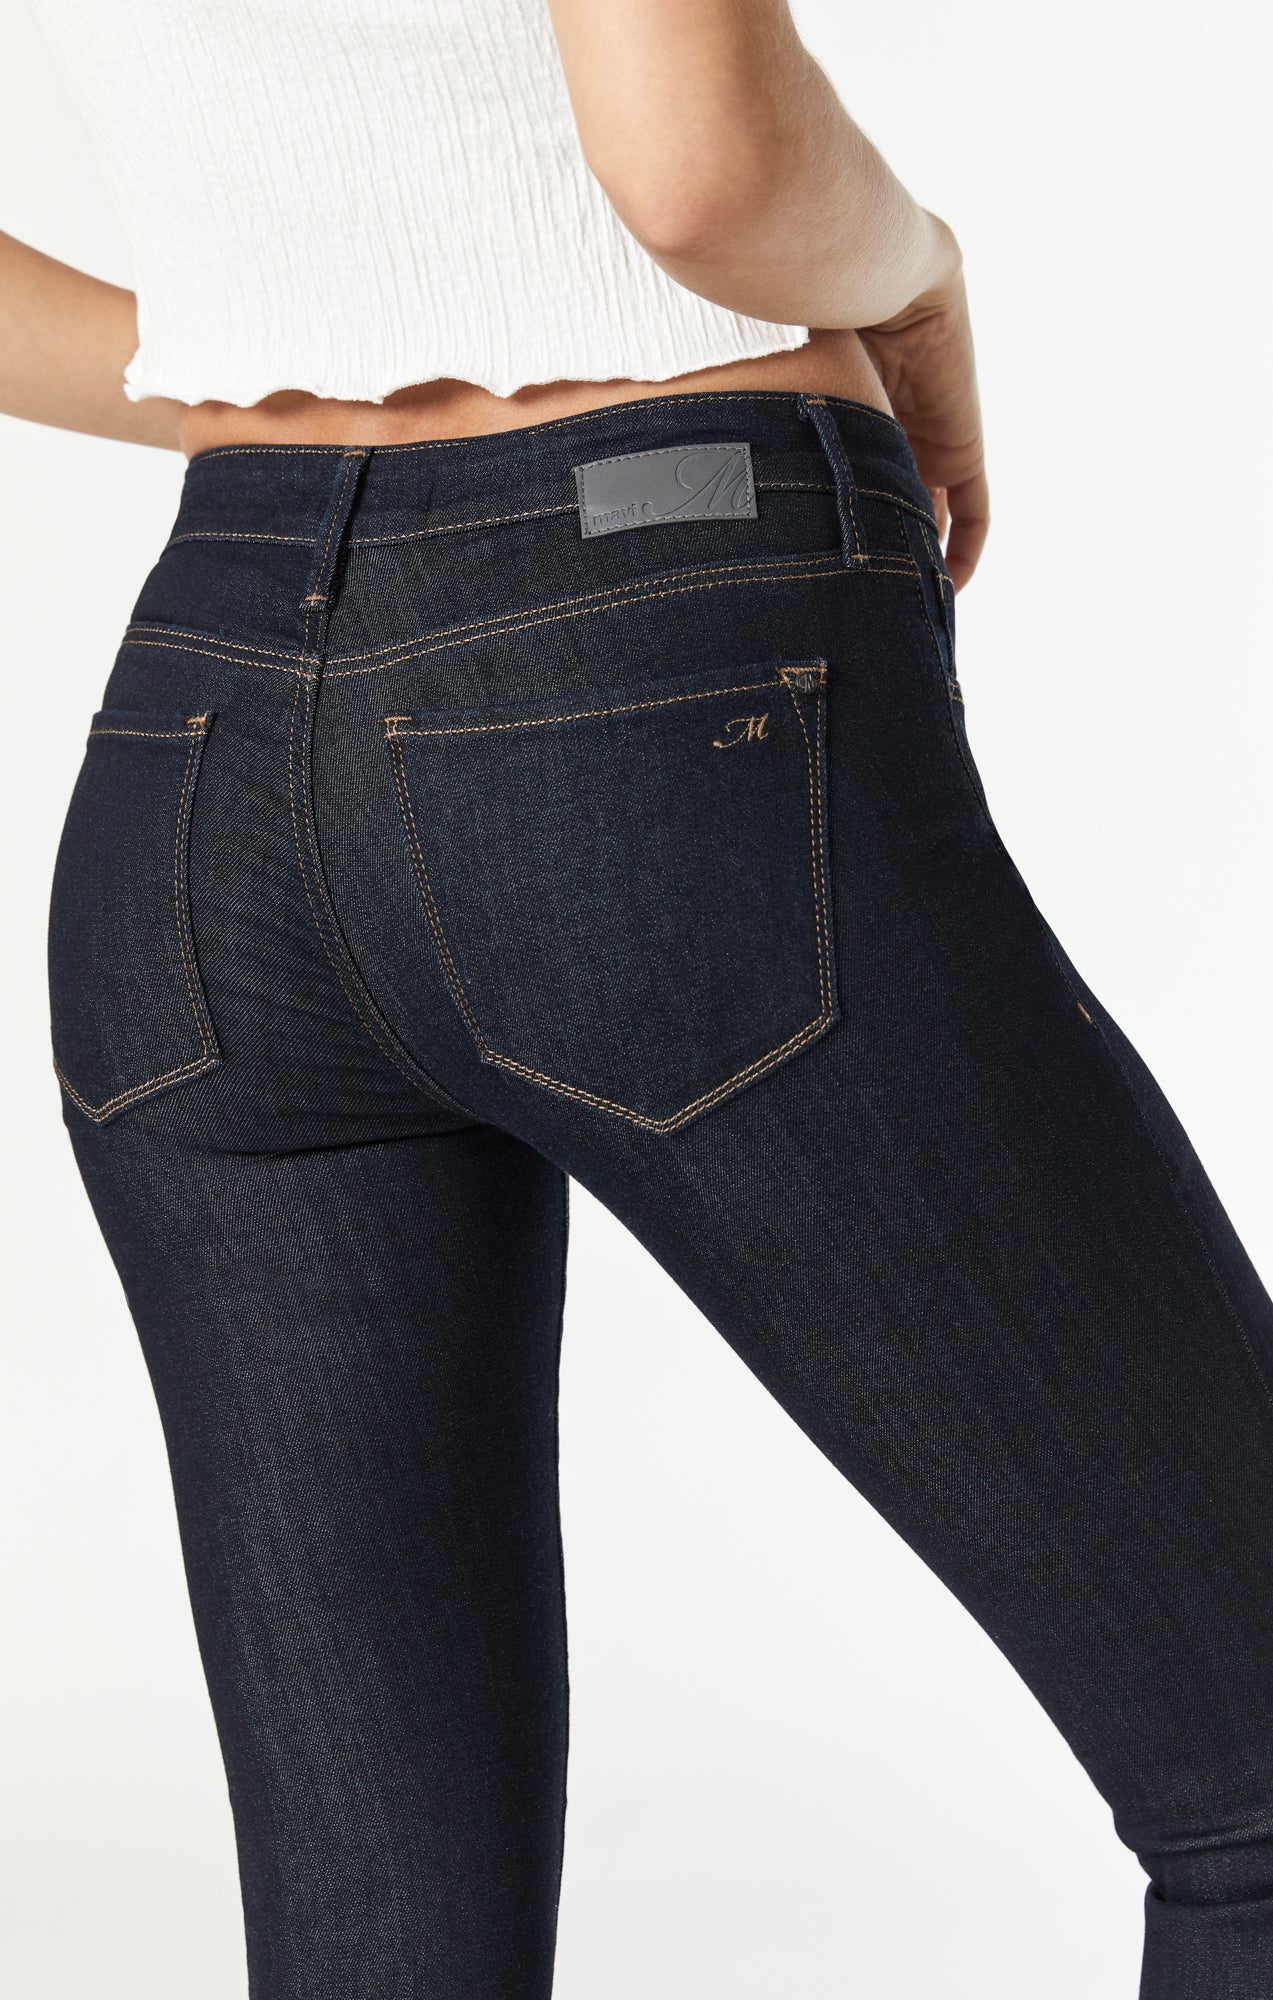 Ankle jeans women • Compare & find best prices today »